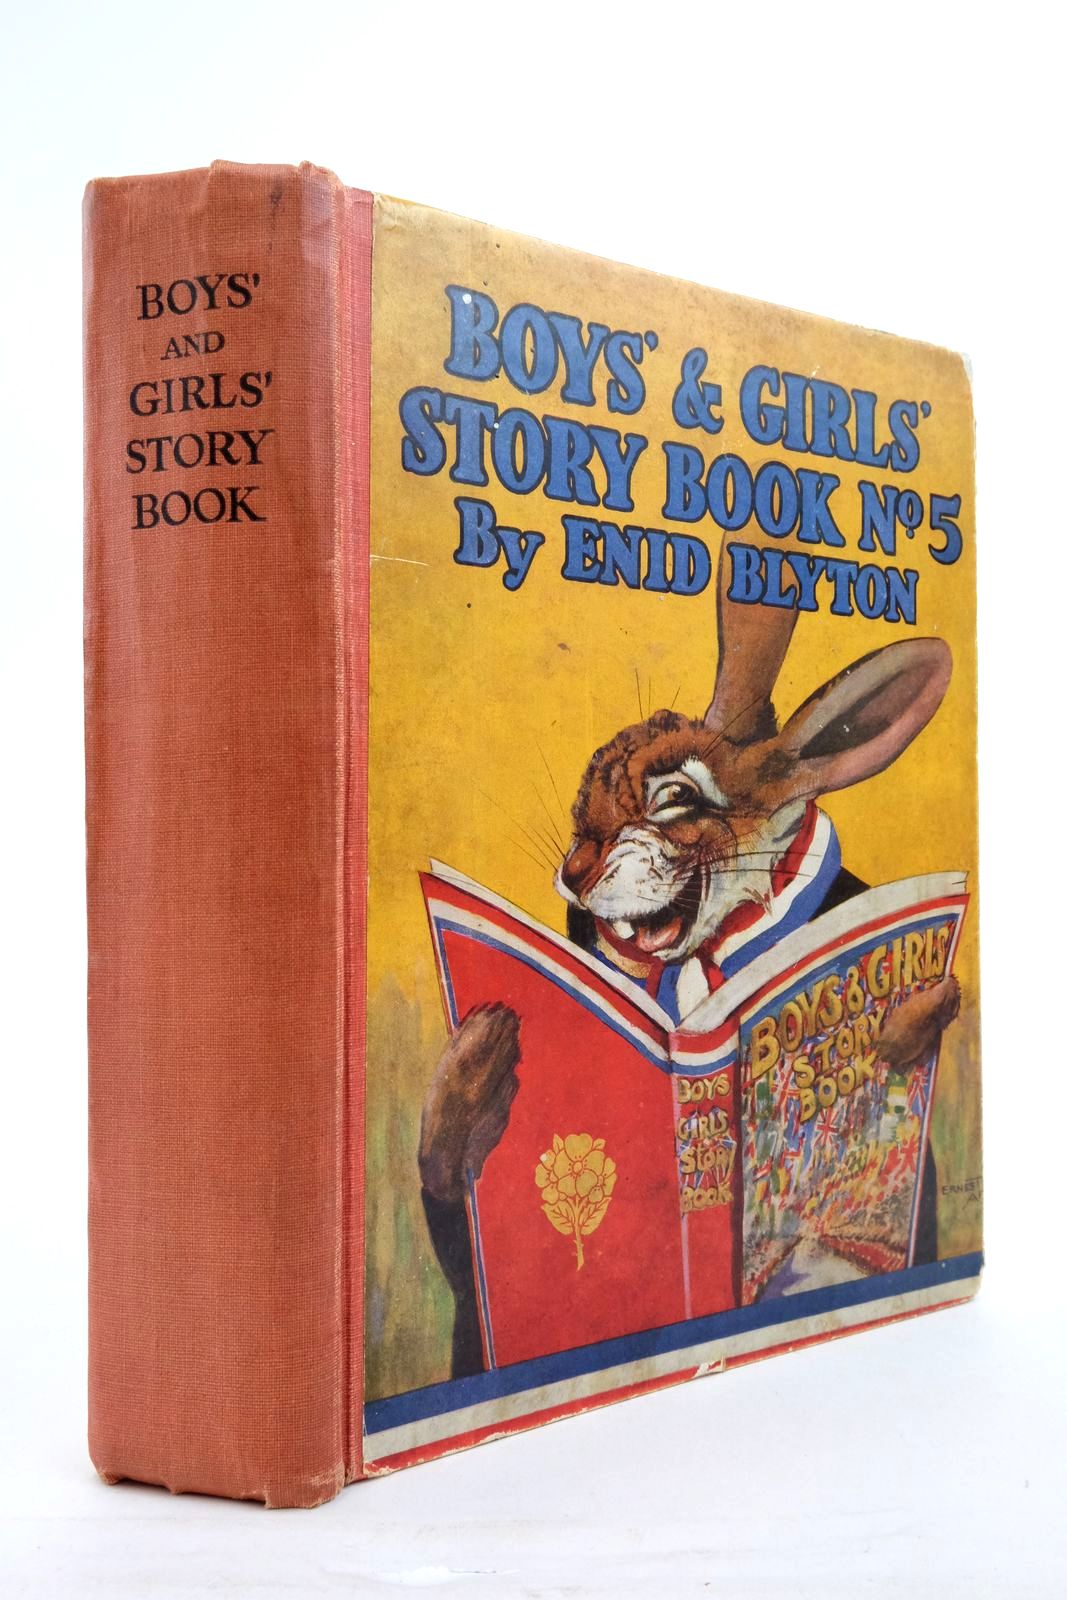 Photo of BOYS' AND GIRLS' STORY BOOK No. 5 written by Blyton, Enid illustrated by Davie, E.H.
Thorp, Marjorie
Adamson, Lorna
Venus, Sylvia
Aris, Ernest A. published by News Chronicle (STOCK CODE: 2137675)  for sale by Stella & Rose's Books